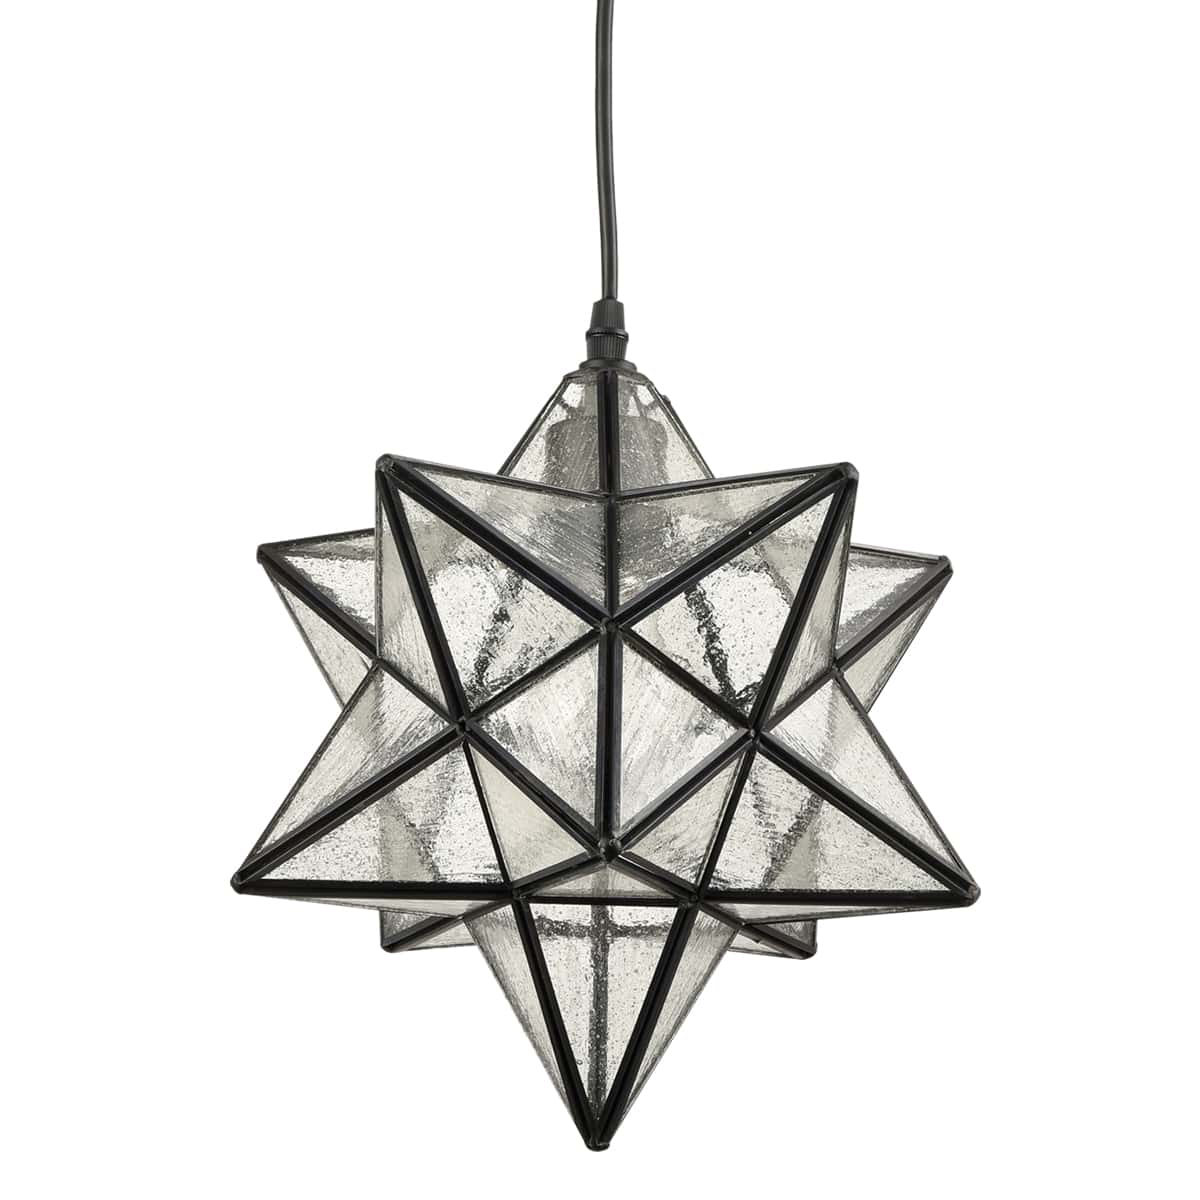 Simple Moravian Star Exterior Light with Simple Decor